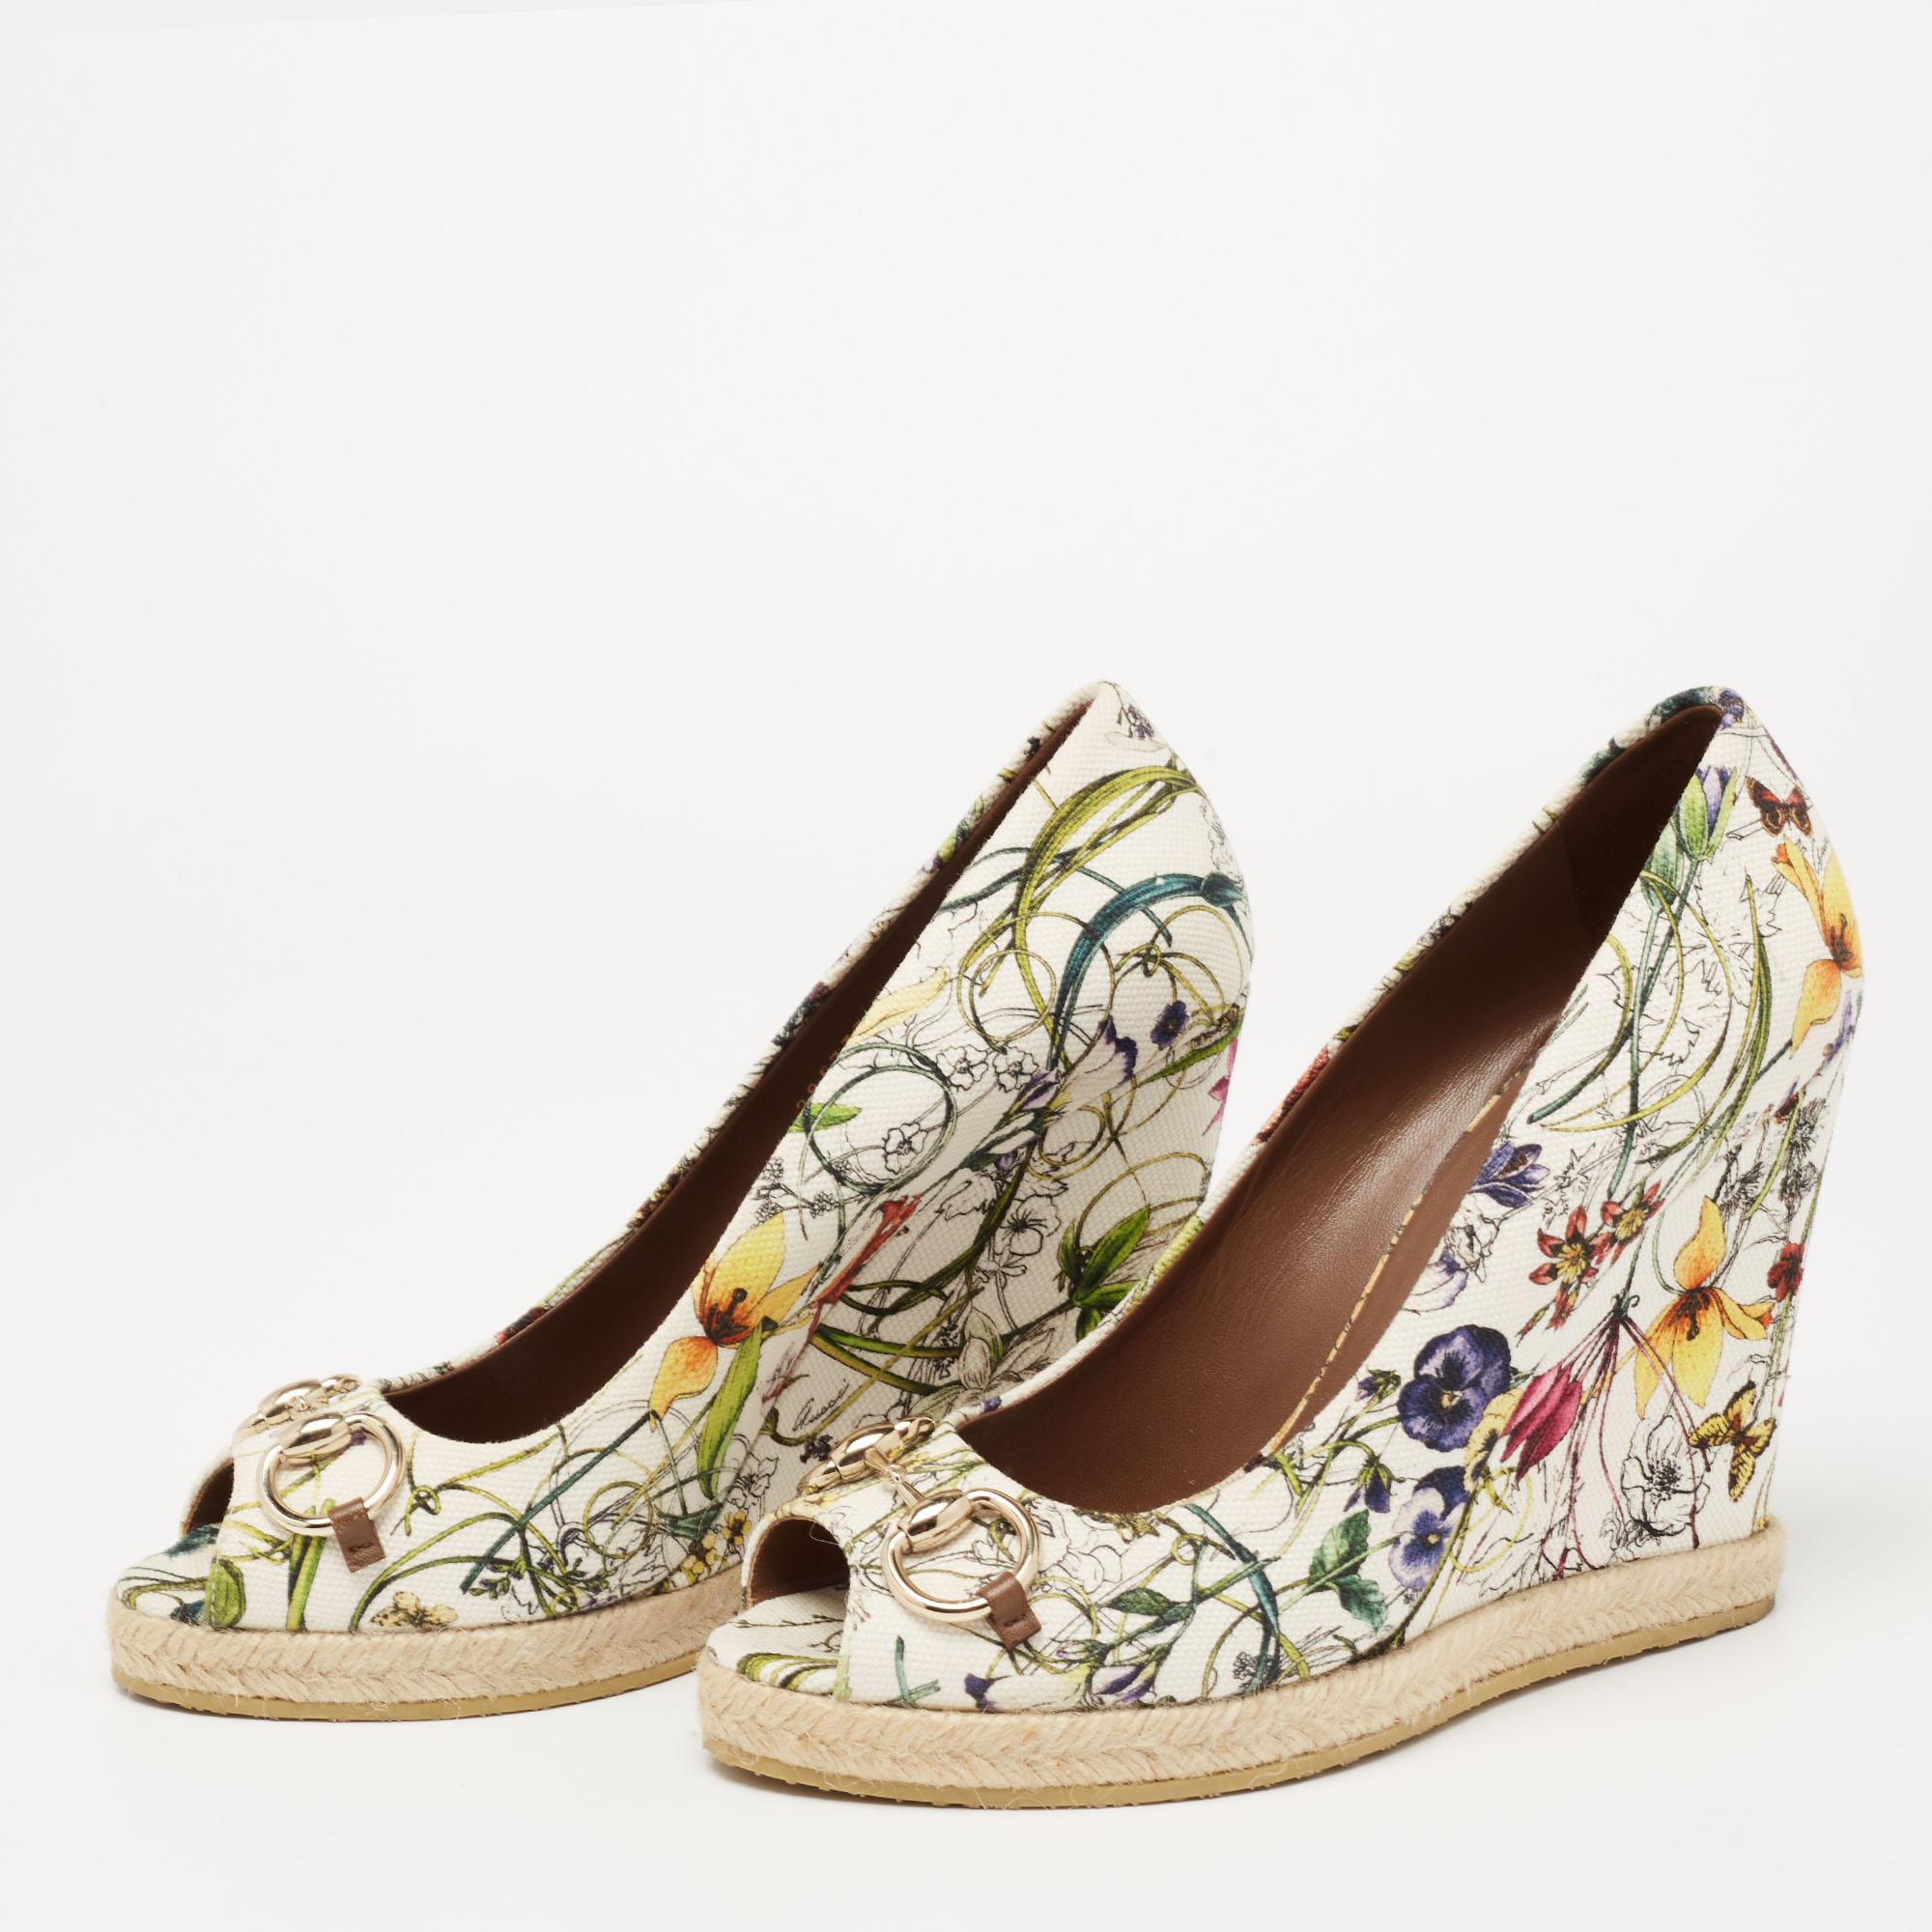 These wedge pumps from Gucci are crafted from canvas in a multicolored, floral print. They feature the signature Horsebit accents on the vamps, smooth insoles, and durable rubber soles for a comfortable walk.